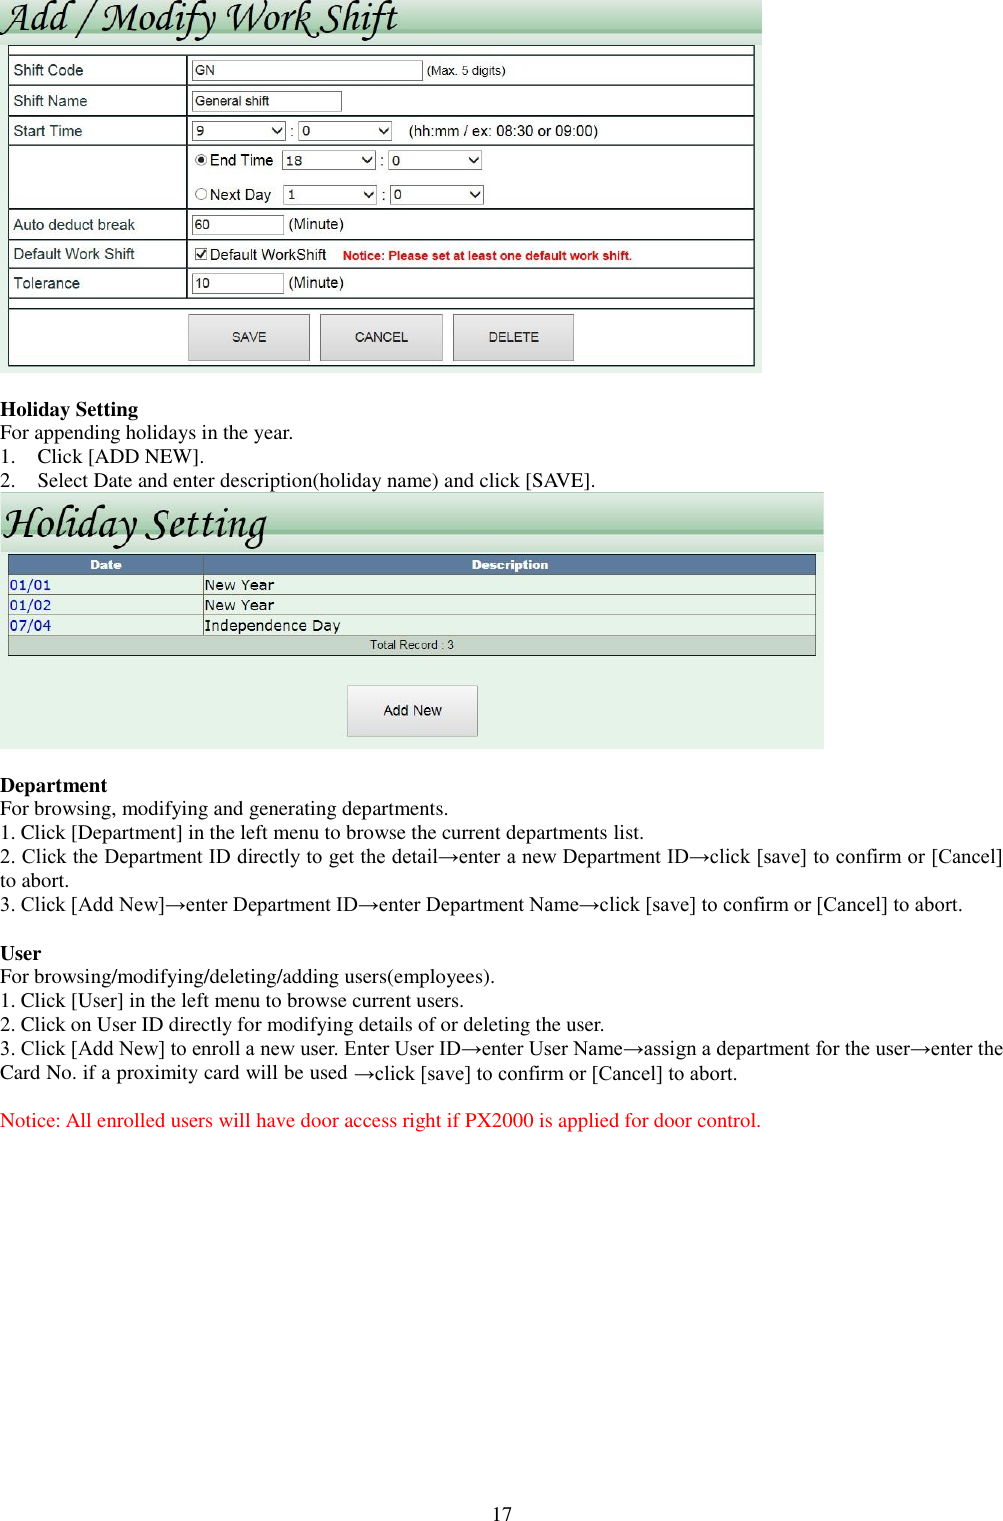  17   Holiday Setting For appending holidays in the year.   1. Click [ADD NEW]. 2. Select Date and enter description(holiday name) and click [SAVE].   Department For browsing, modifying and generating departments. 1. Click [Department] in the left menu to browse the current departments list.   2. Click the Department ID directly to get the detail→enter a new Department ID→click [save] to confirm or [Cancel] to abort. 3. Click [Add New]→enter Department ID→enter Department Name→click [save] to confirm or [Cancel] to abort.  User For browsing/modifying/deleting/adding users(employees). 1. Click [User] in the left menu to browse current users. 2. Click on User ID directly for modifying details of or deleting the user. 3. Click [Add New] to enroll a new user. Enter User ID→enter User Name→assign a department for the user→enter the Card No. if a proximity card will be used →click [save] to confirm or [Cancel] to abort. Notice: All enrolled users will have door access right if PX2000 is applied for door control. 